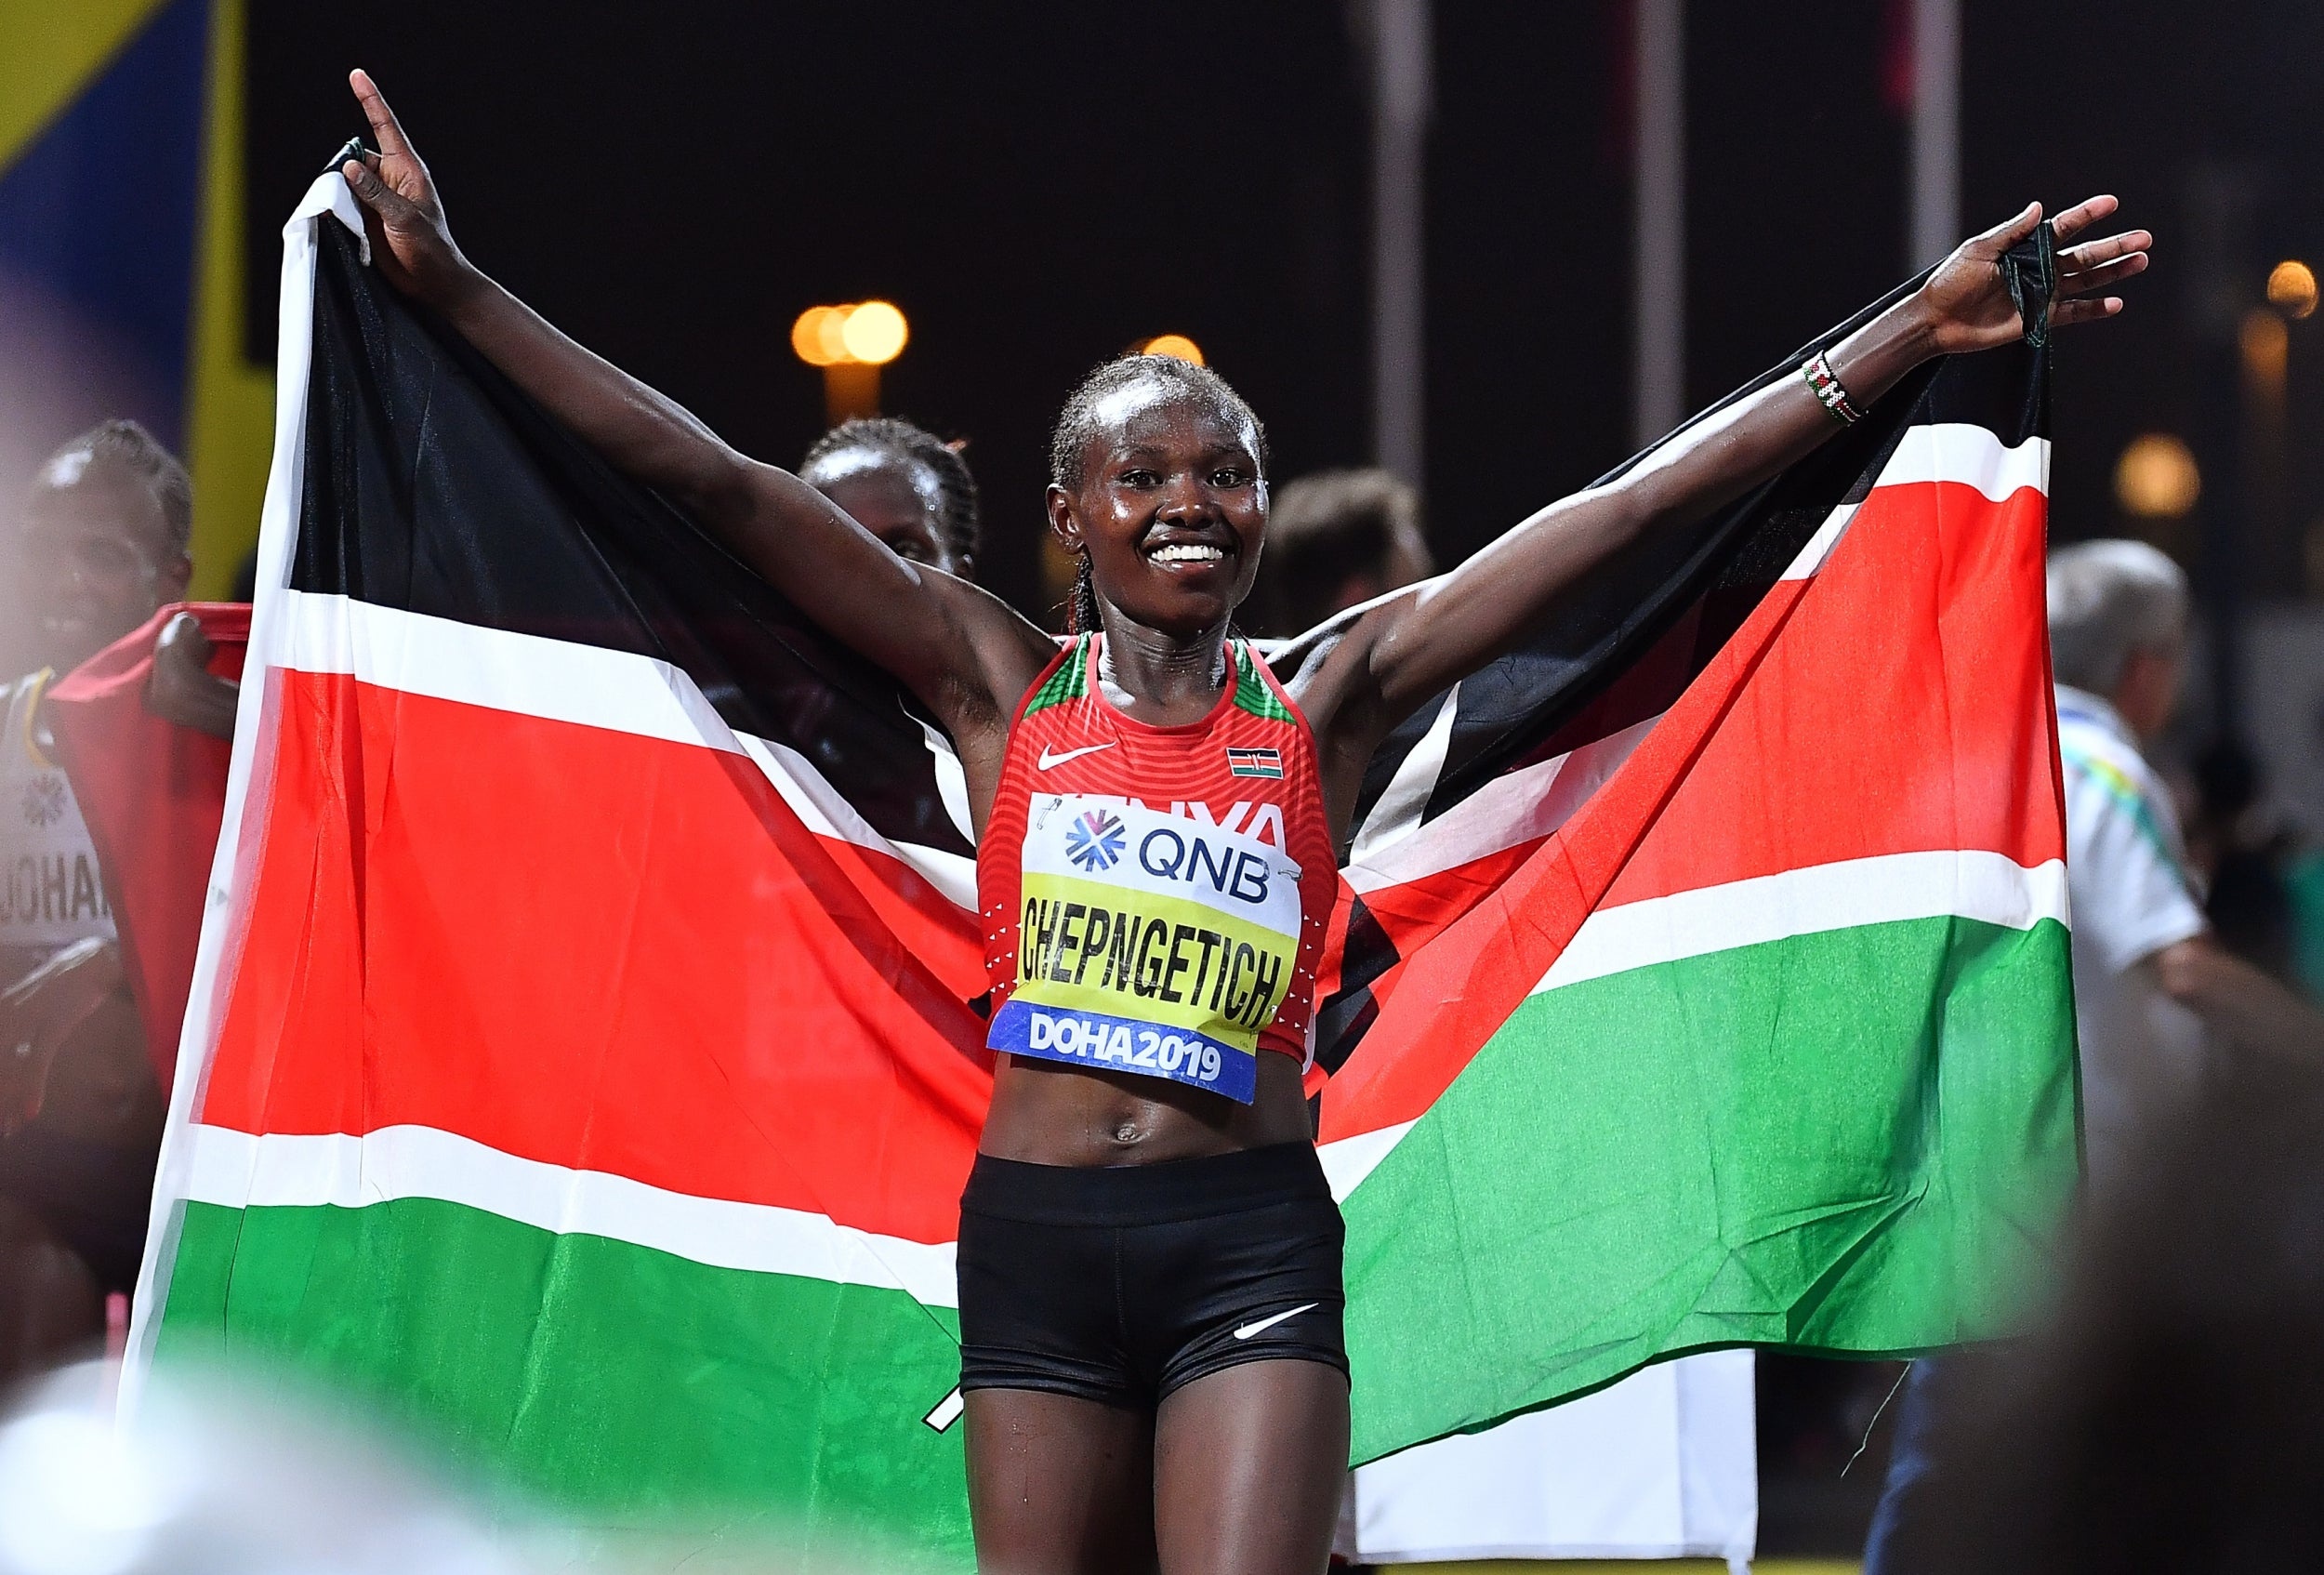 Ruth Chepngetich, Nike Vaporflys, Technological doping, Records tumble, 2500x1700 HD Desktop